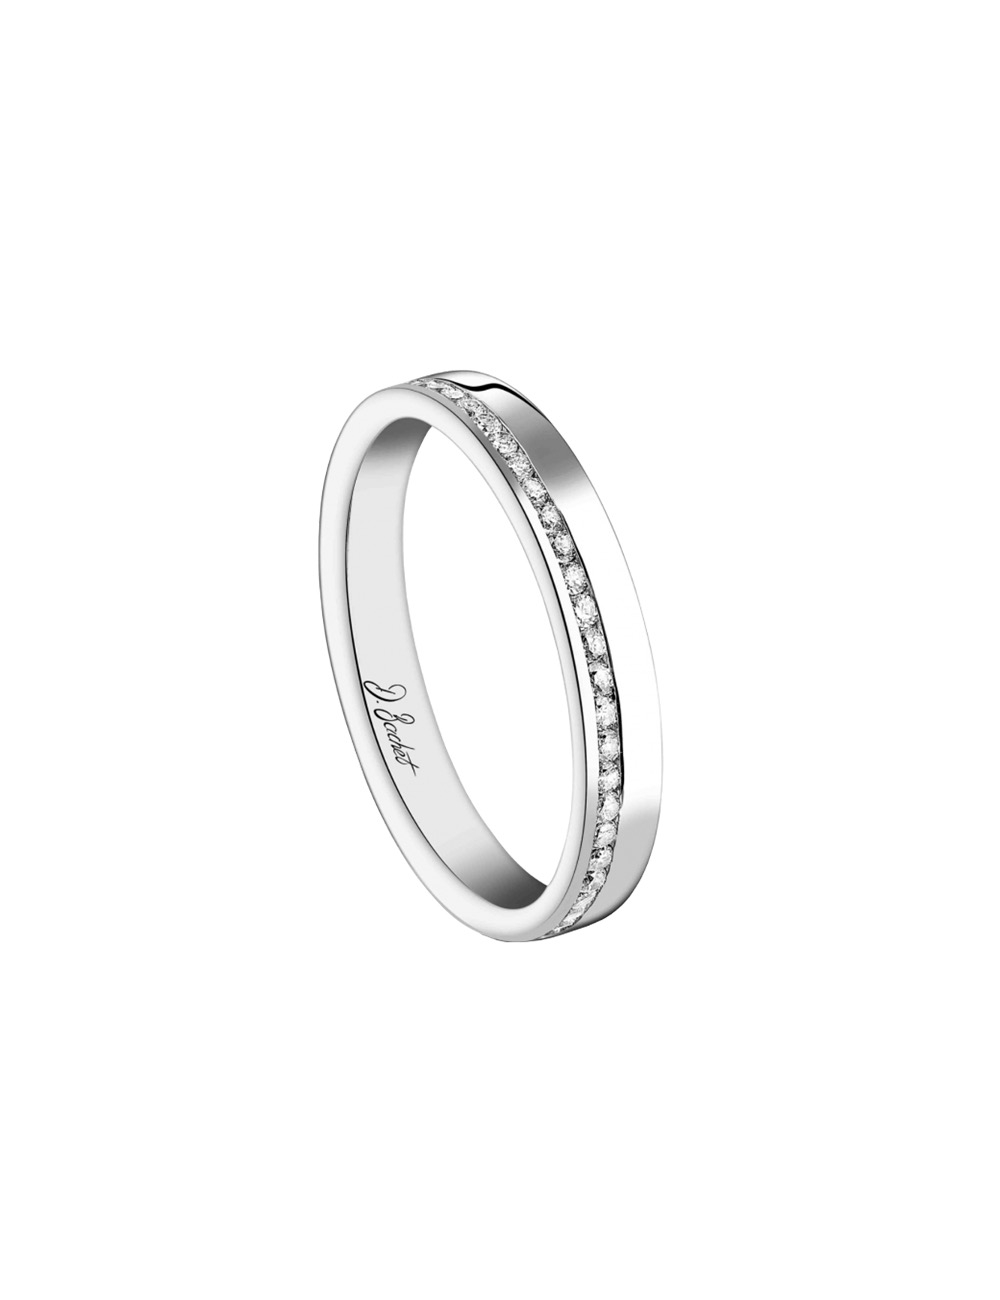 Refined women's diamond ring with modern lines in platinum, perfect to be worn alone or with an engagement ring.